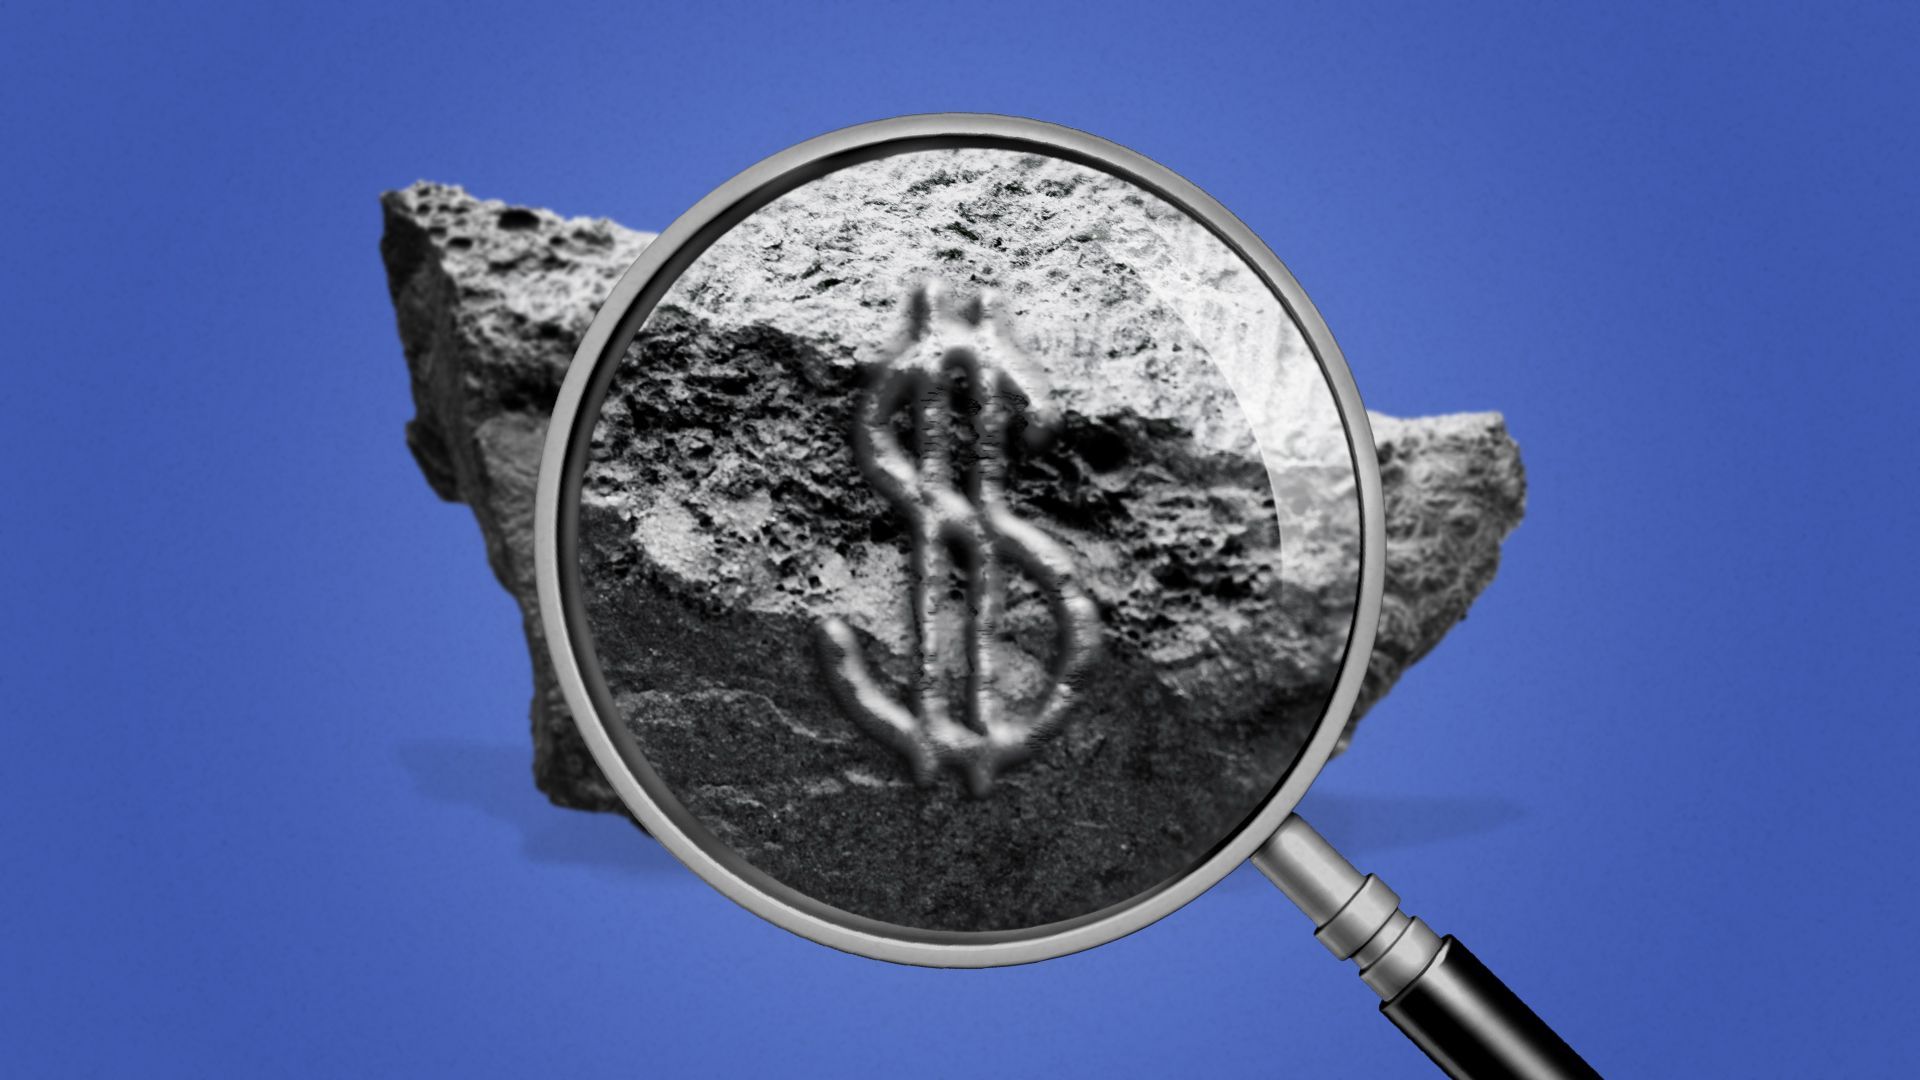 Illustration of a magnifying glass finding a dollar sign on a piece of nickel ore.